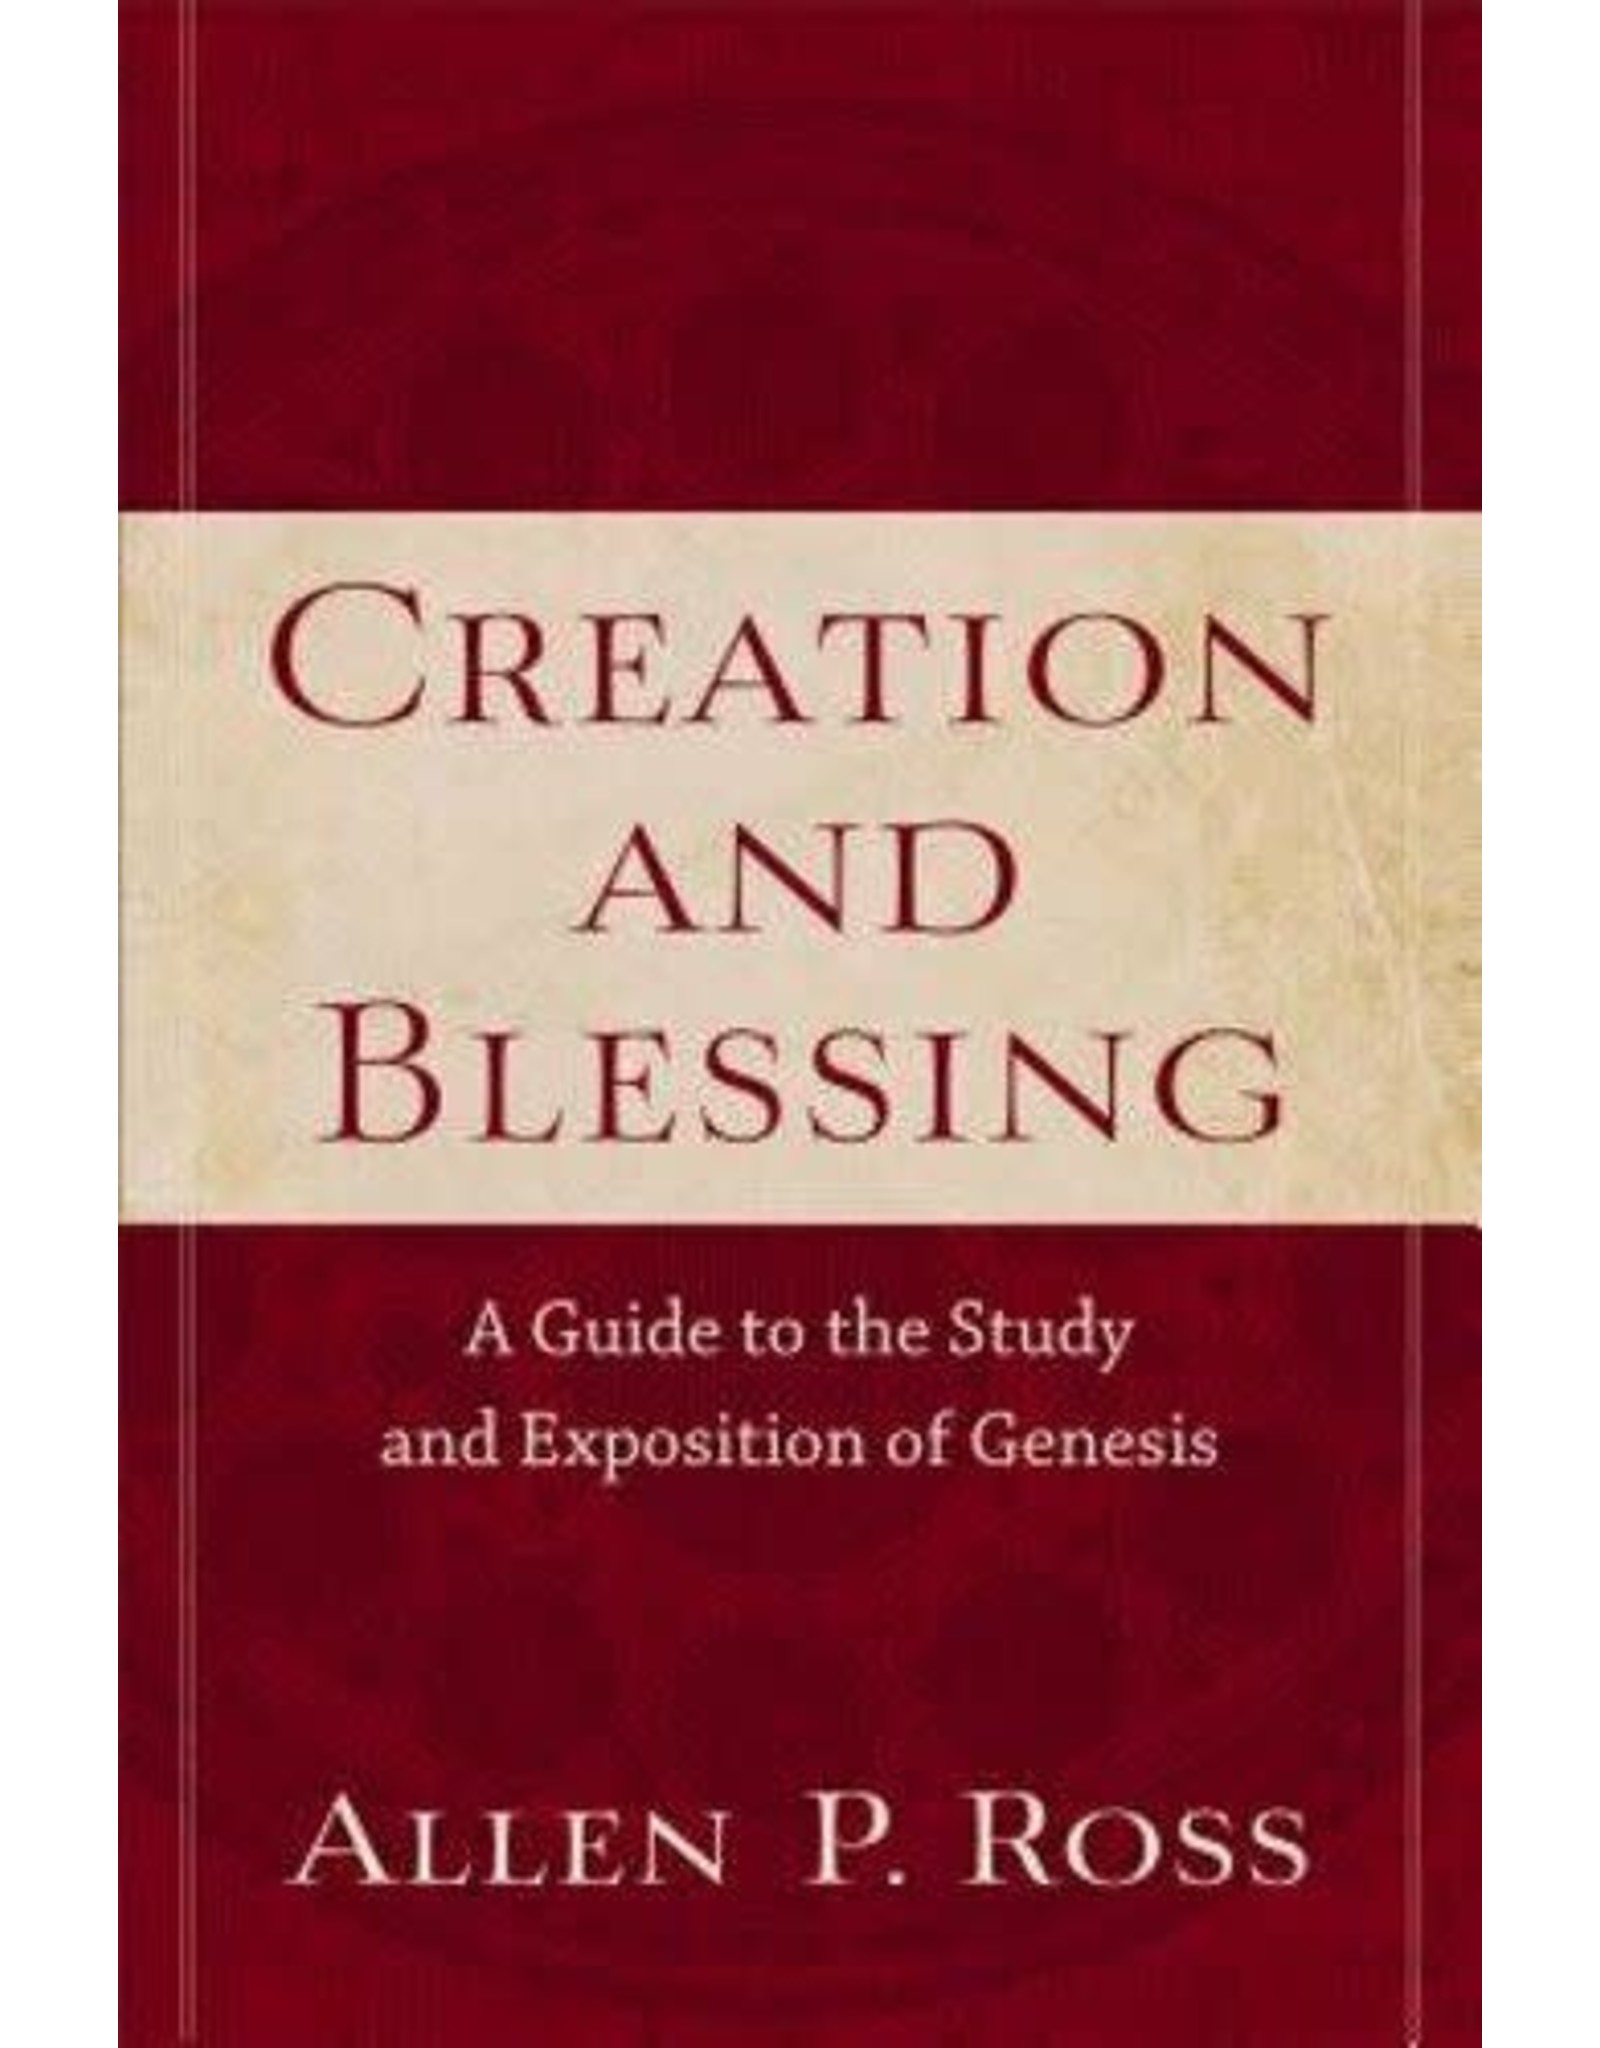 Baker Publishing Group / Bethany Creation and Blessing: A Guide to the Study and Exposition of Genesis